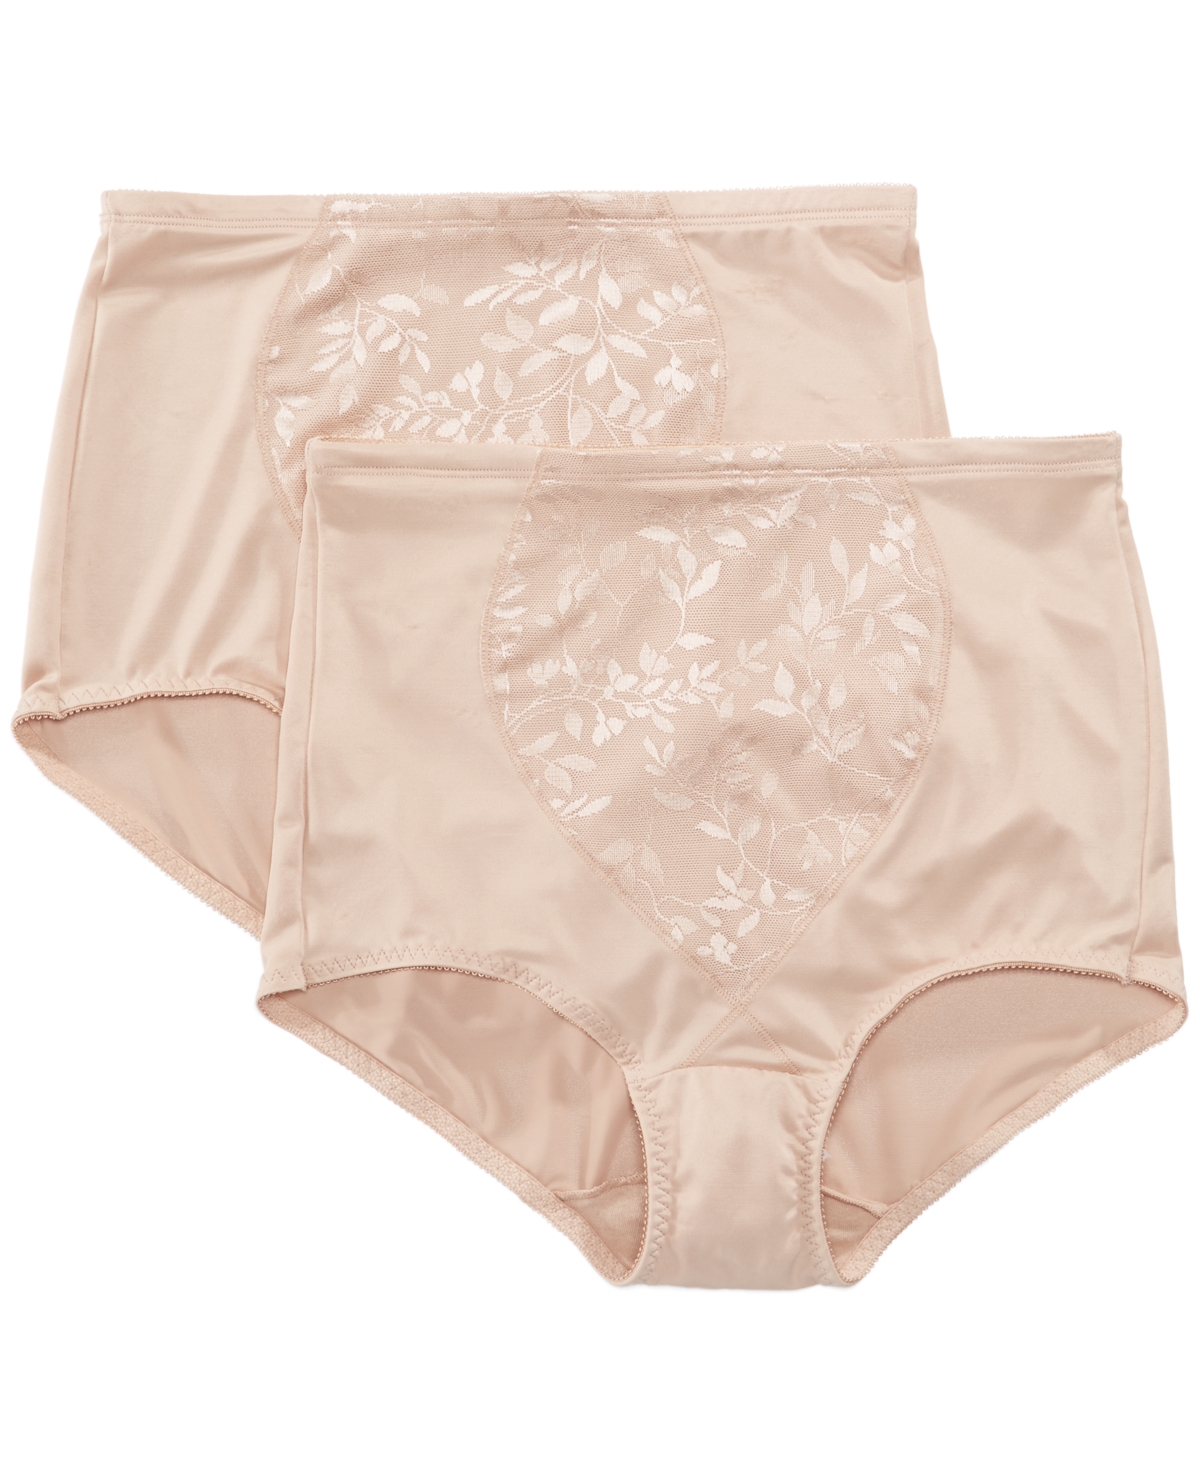 Shop Bali Women's Firm Control Tummy Panel 2 Pack X710 In Nude Jacquard,nude Jacquard